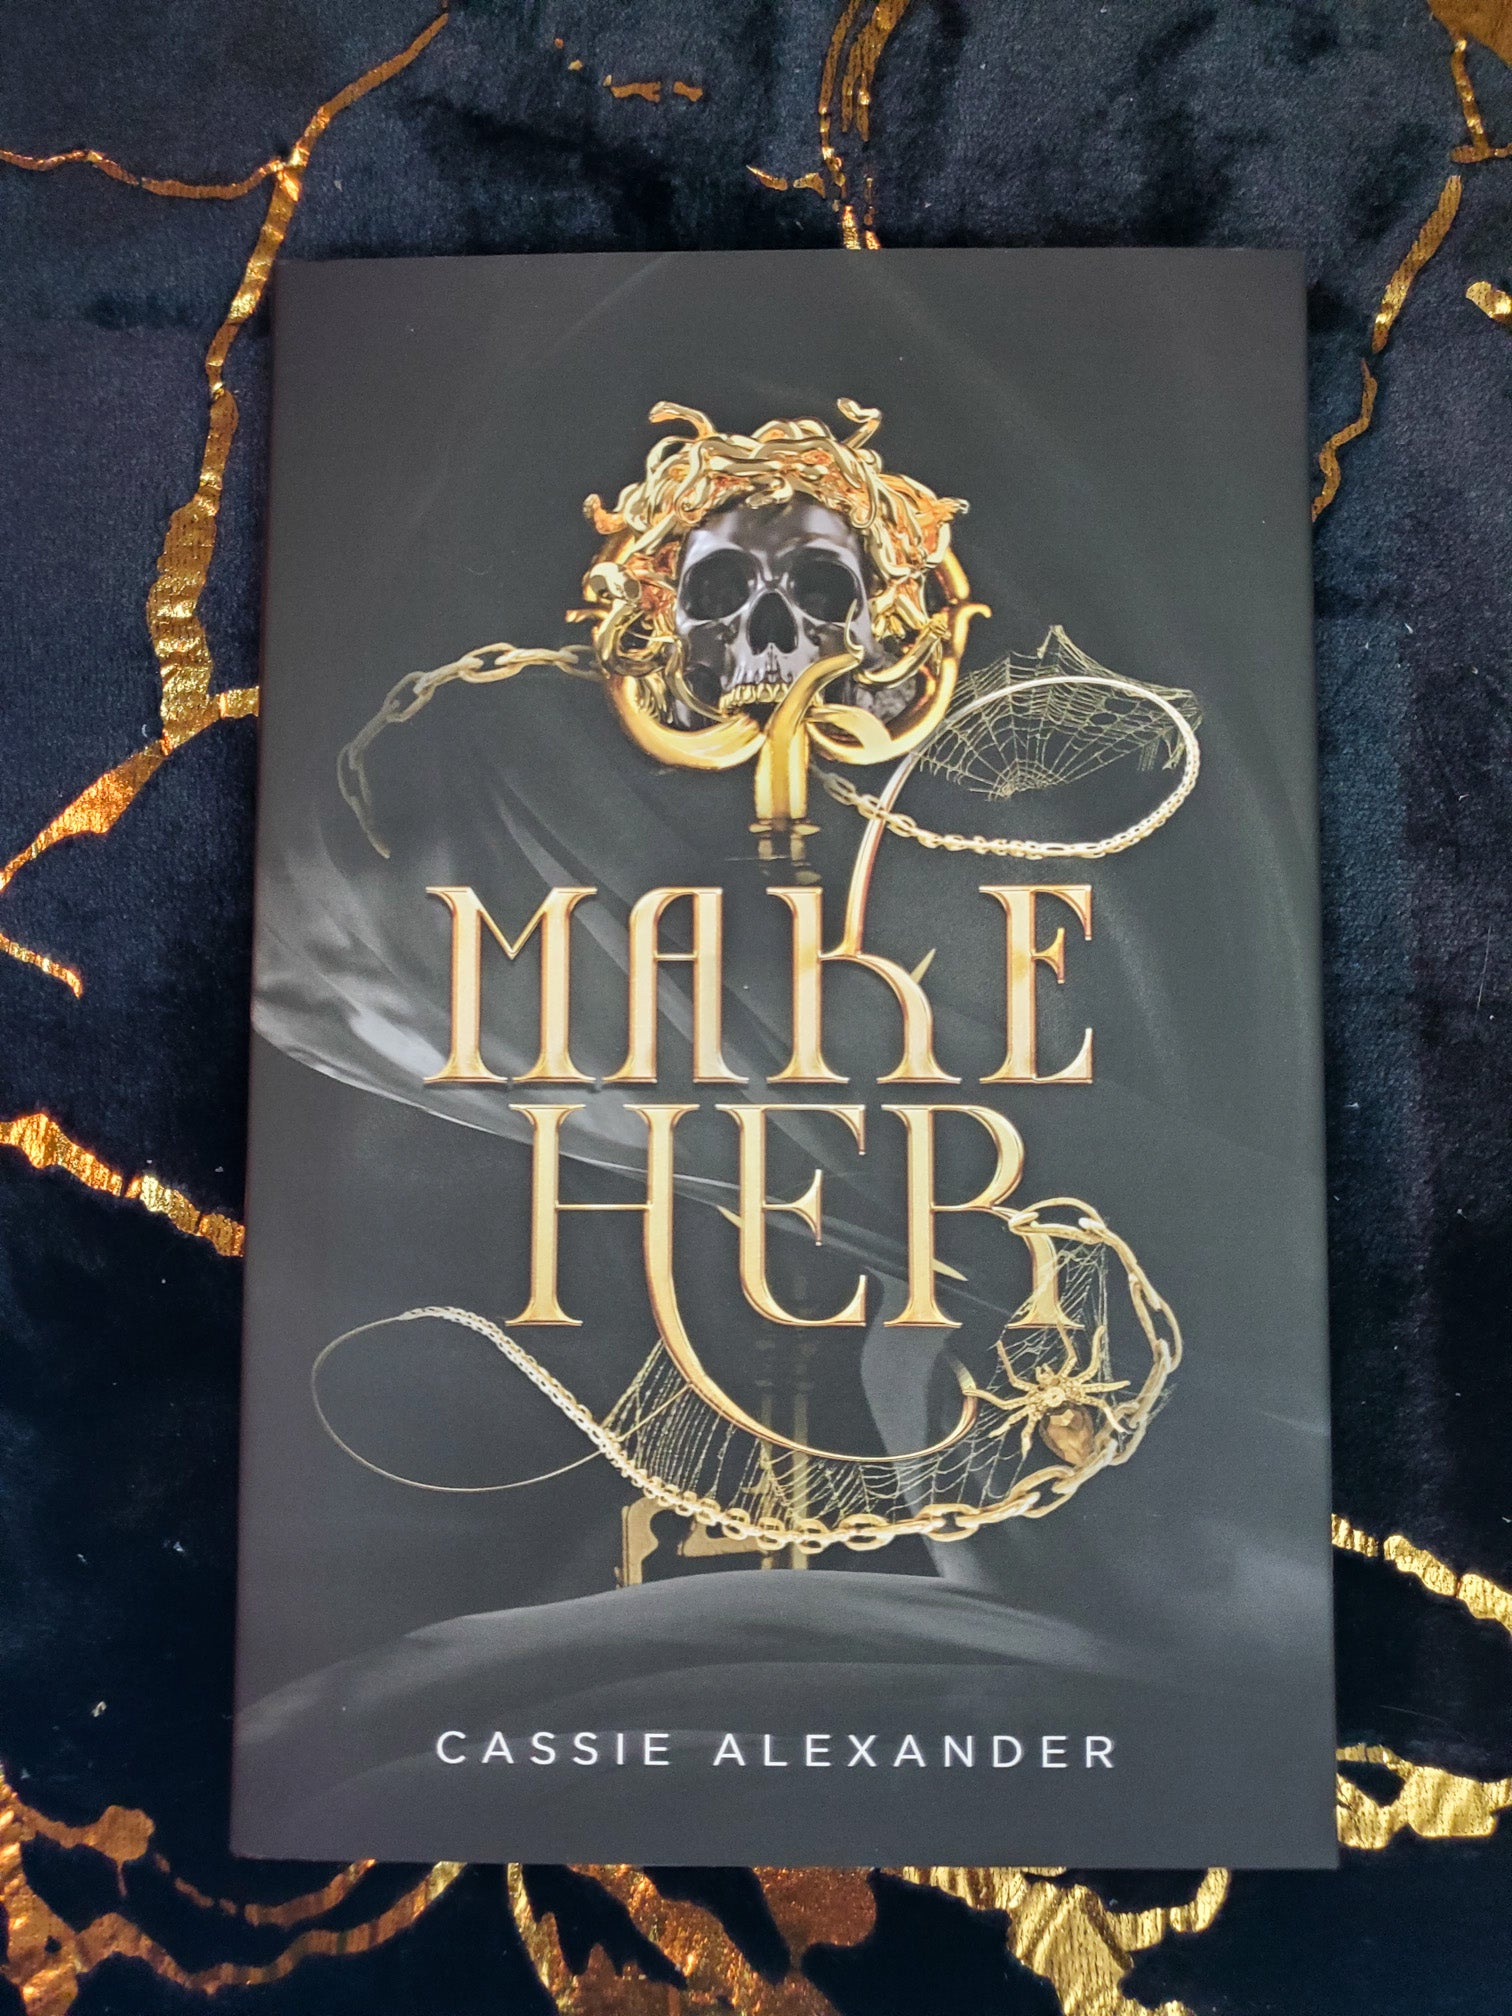 Hardcover of Make Her by Cassie Alexander on a black and gold background. Shows the front cover.